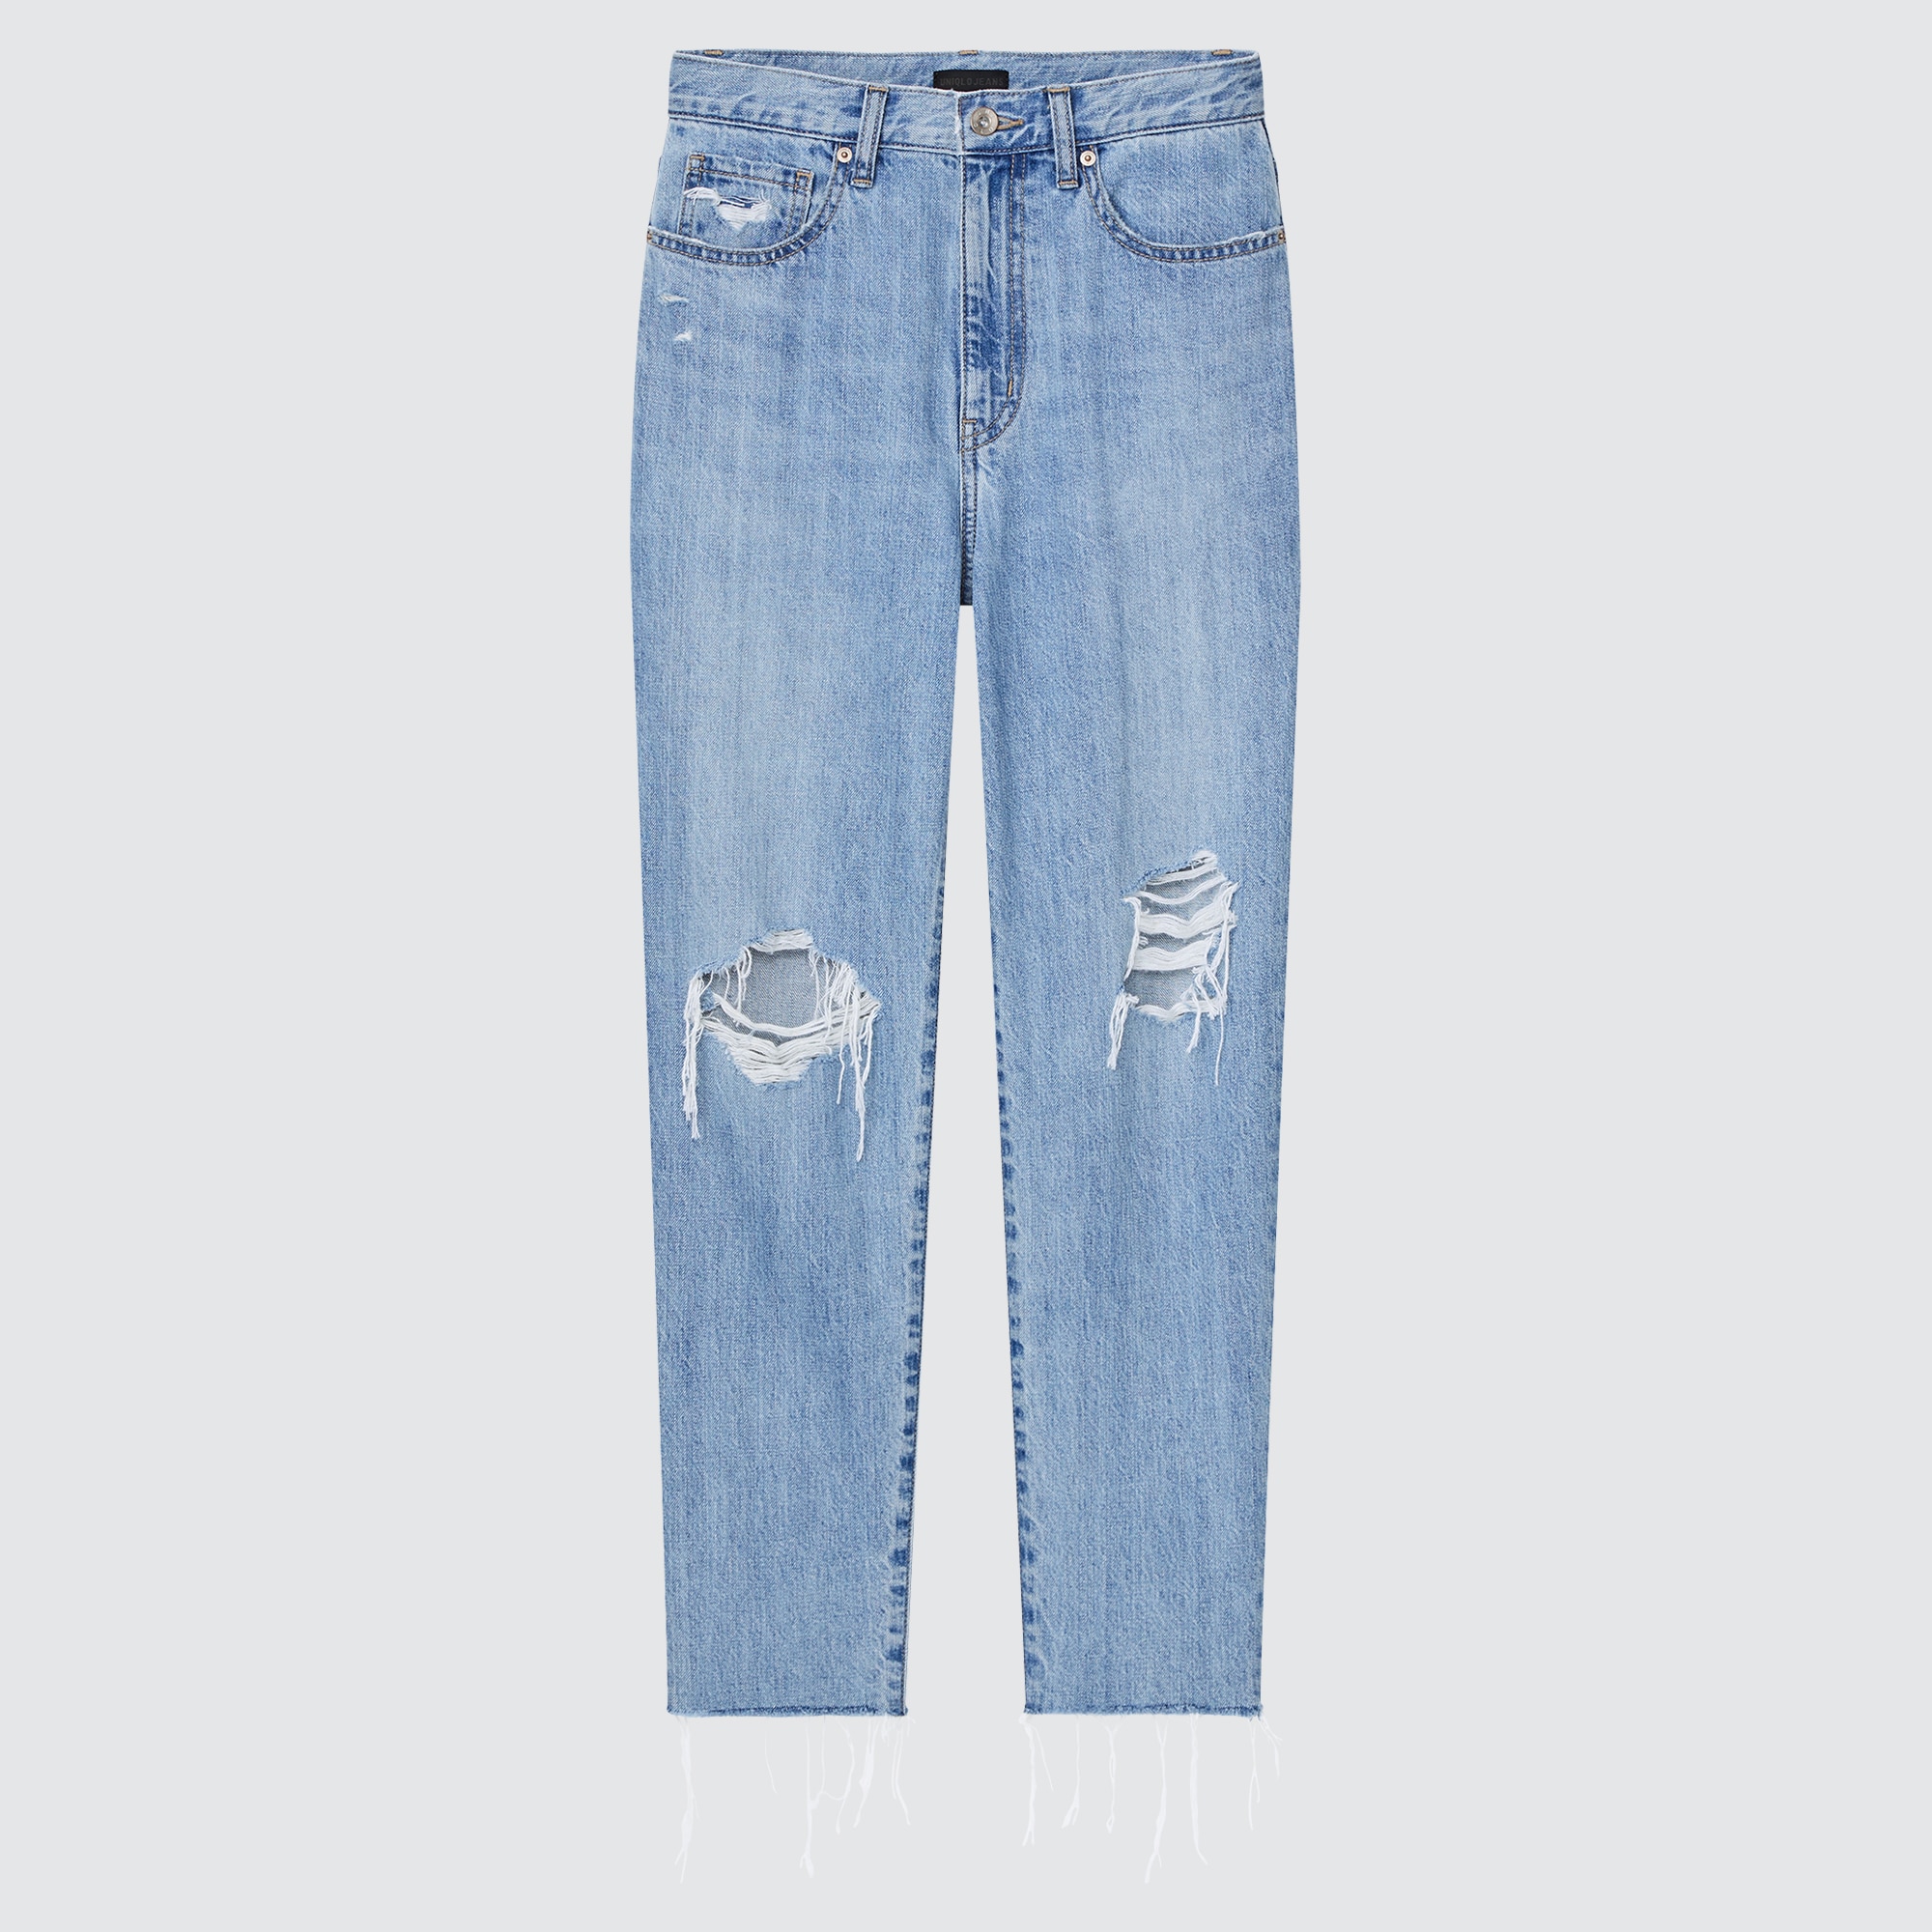 UNIQLO Distressed Peg Top High-Rise Jeans | StyleHint